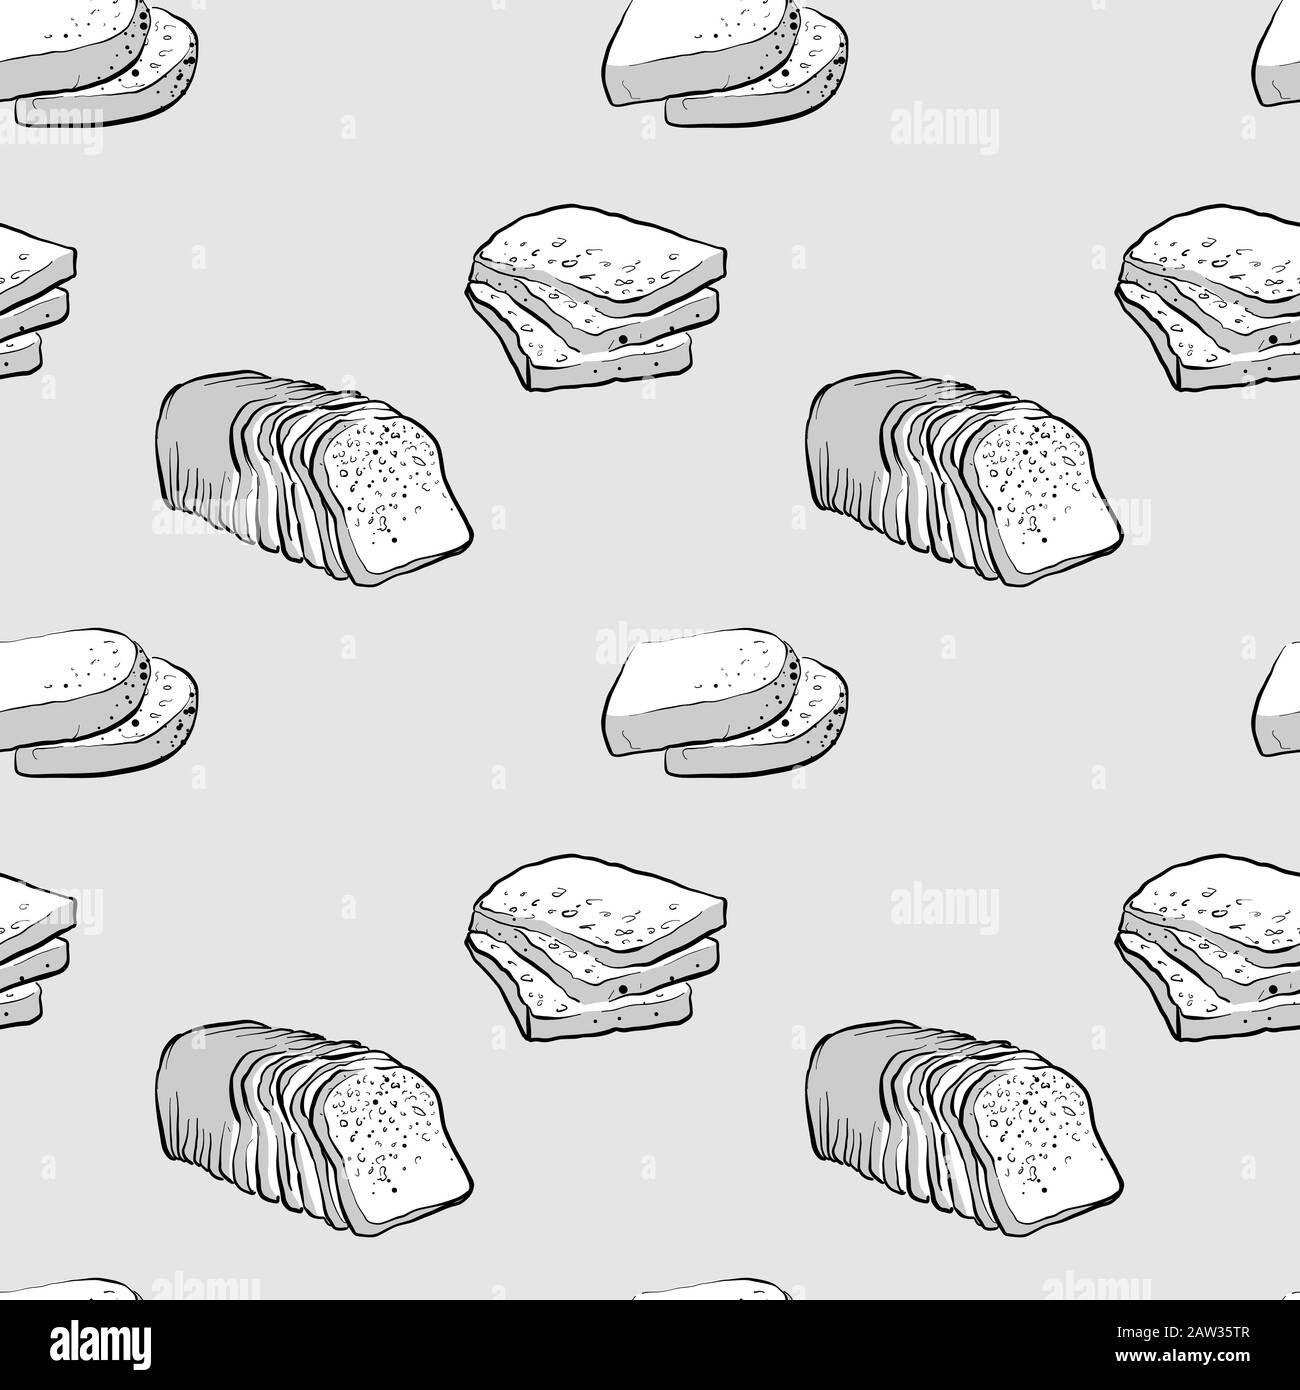 Brown bread seamless pattern greyscale drawing. Useable for wallpaper or any sized decoration. Handdrawn Vector Illustration Stock Vector